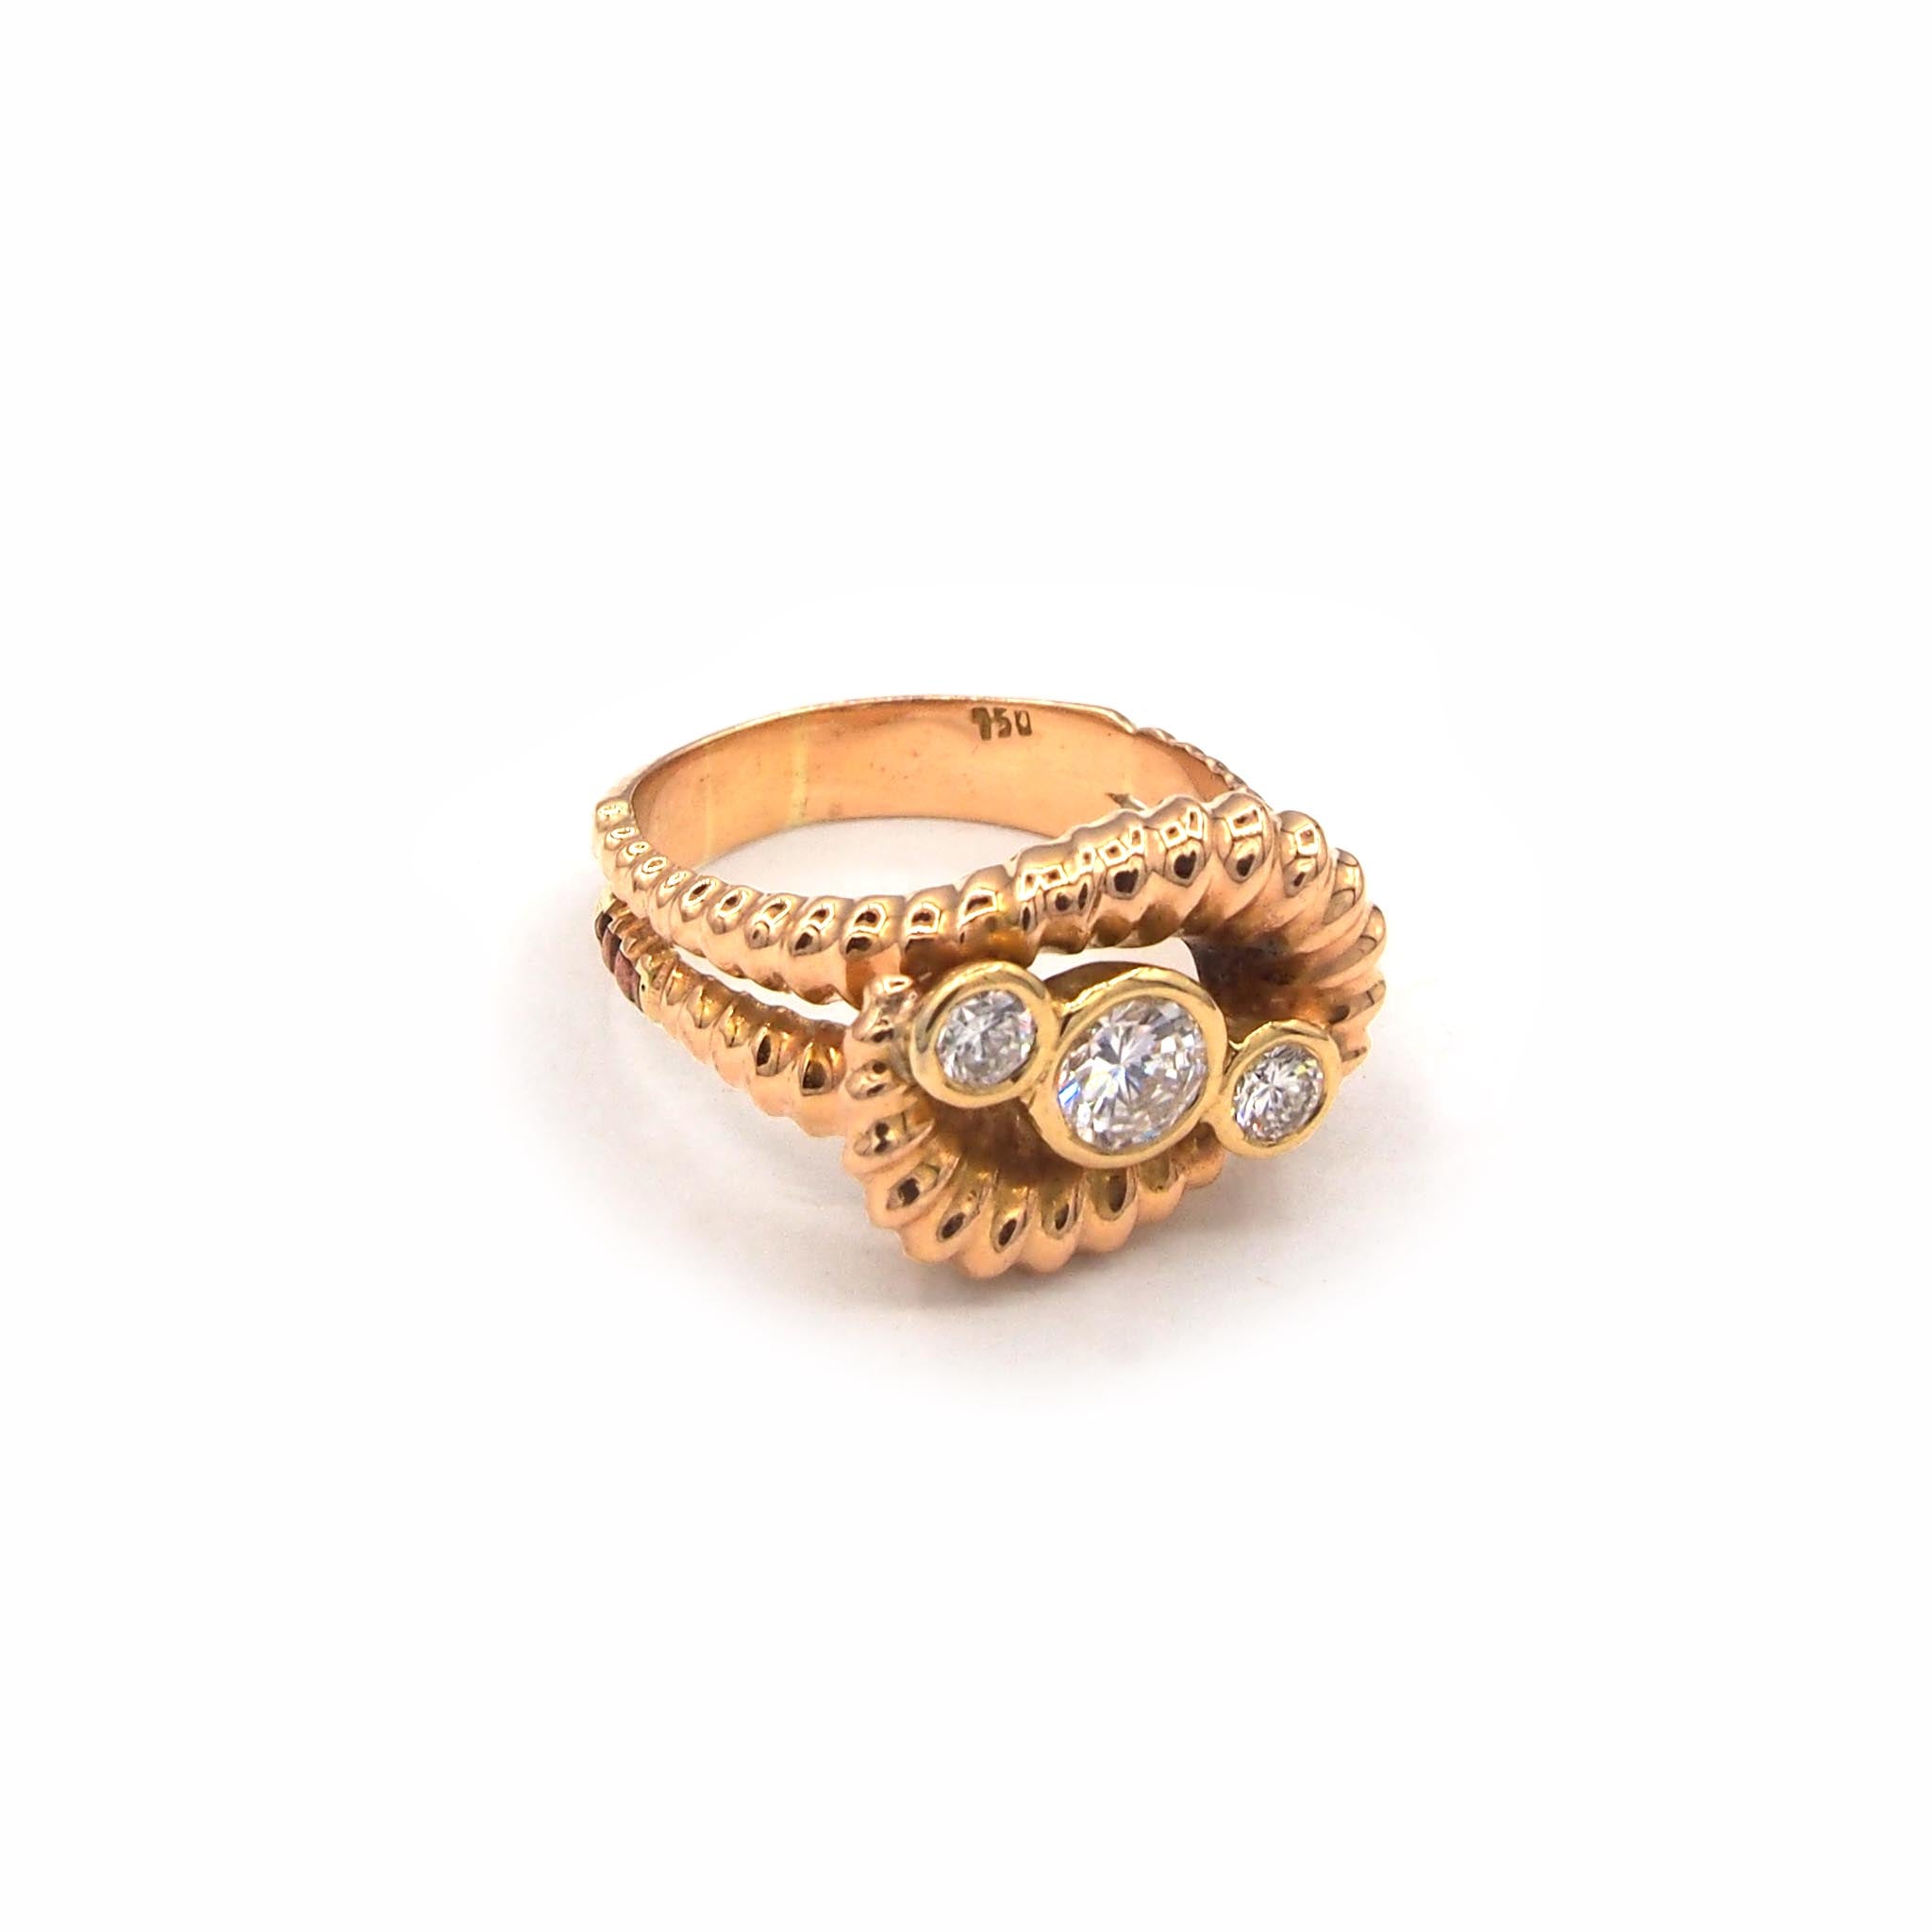 Vintage 18K mid century diamond ring from Lico Jewelry - front/side view